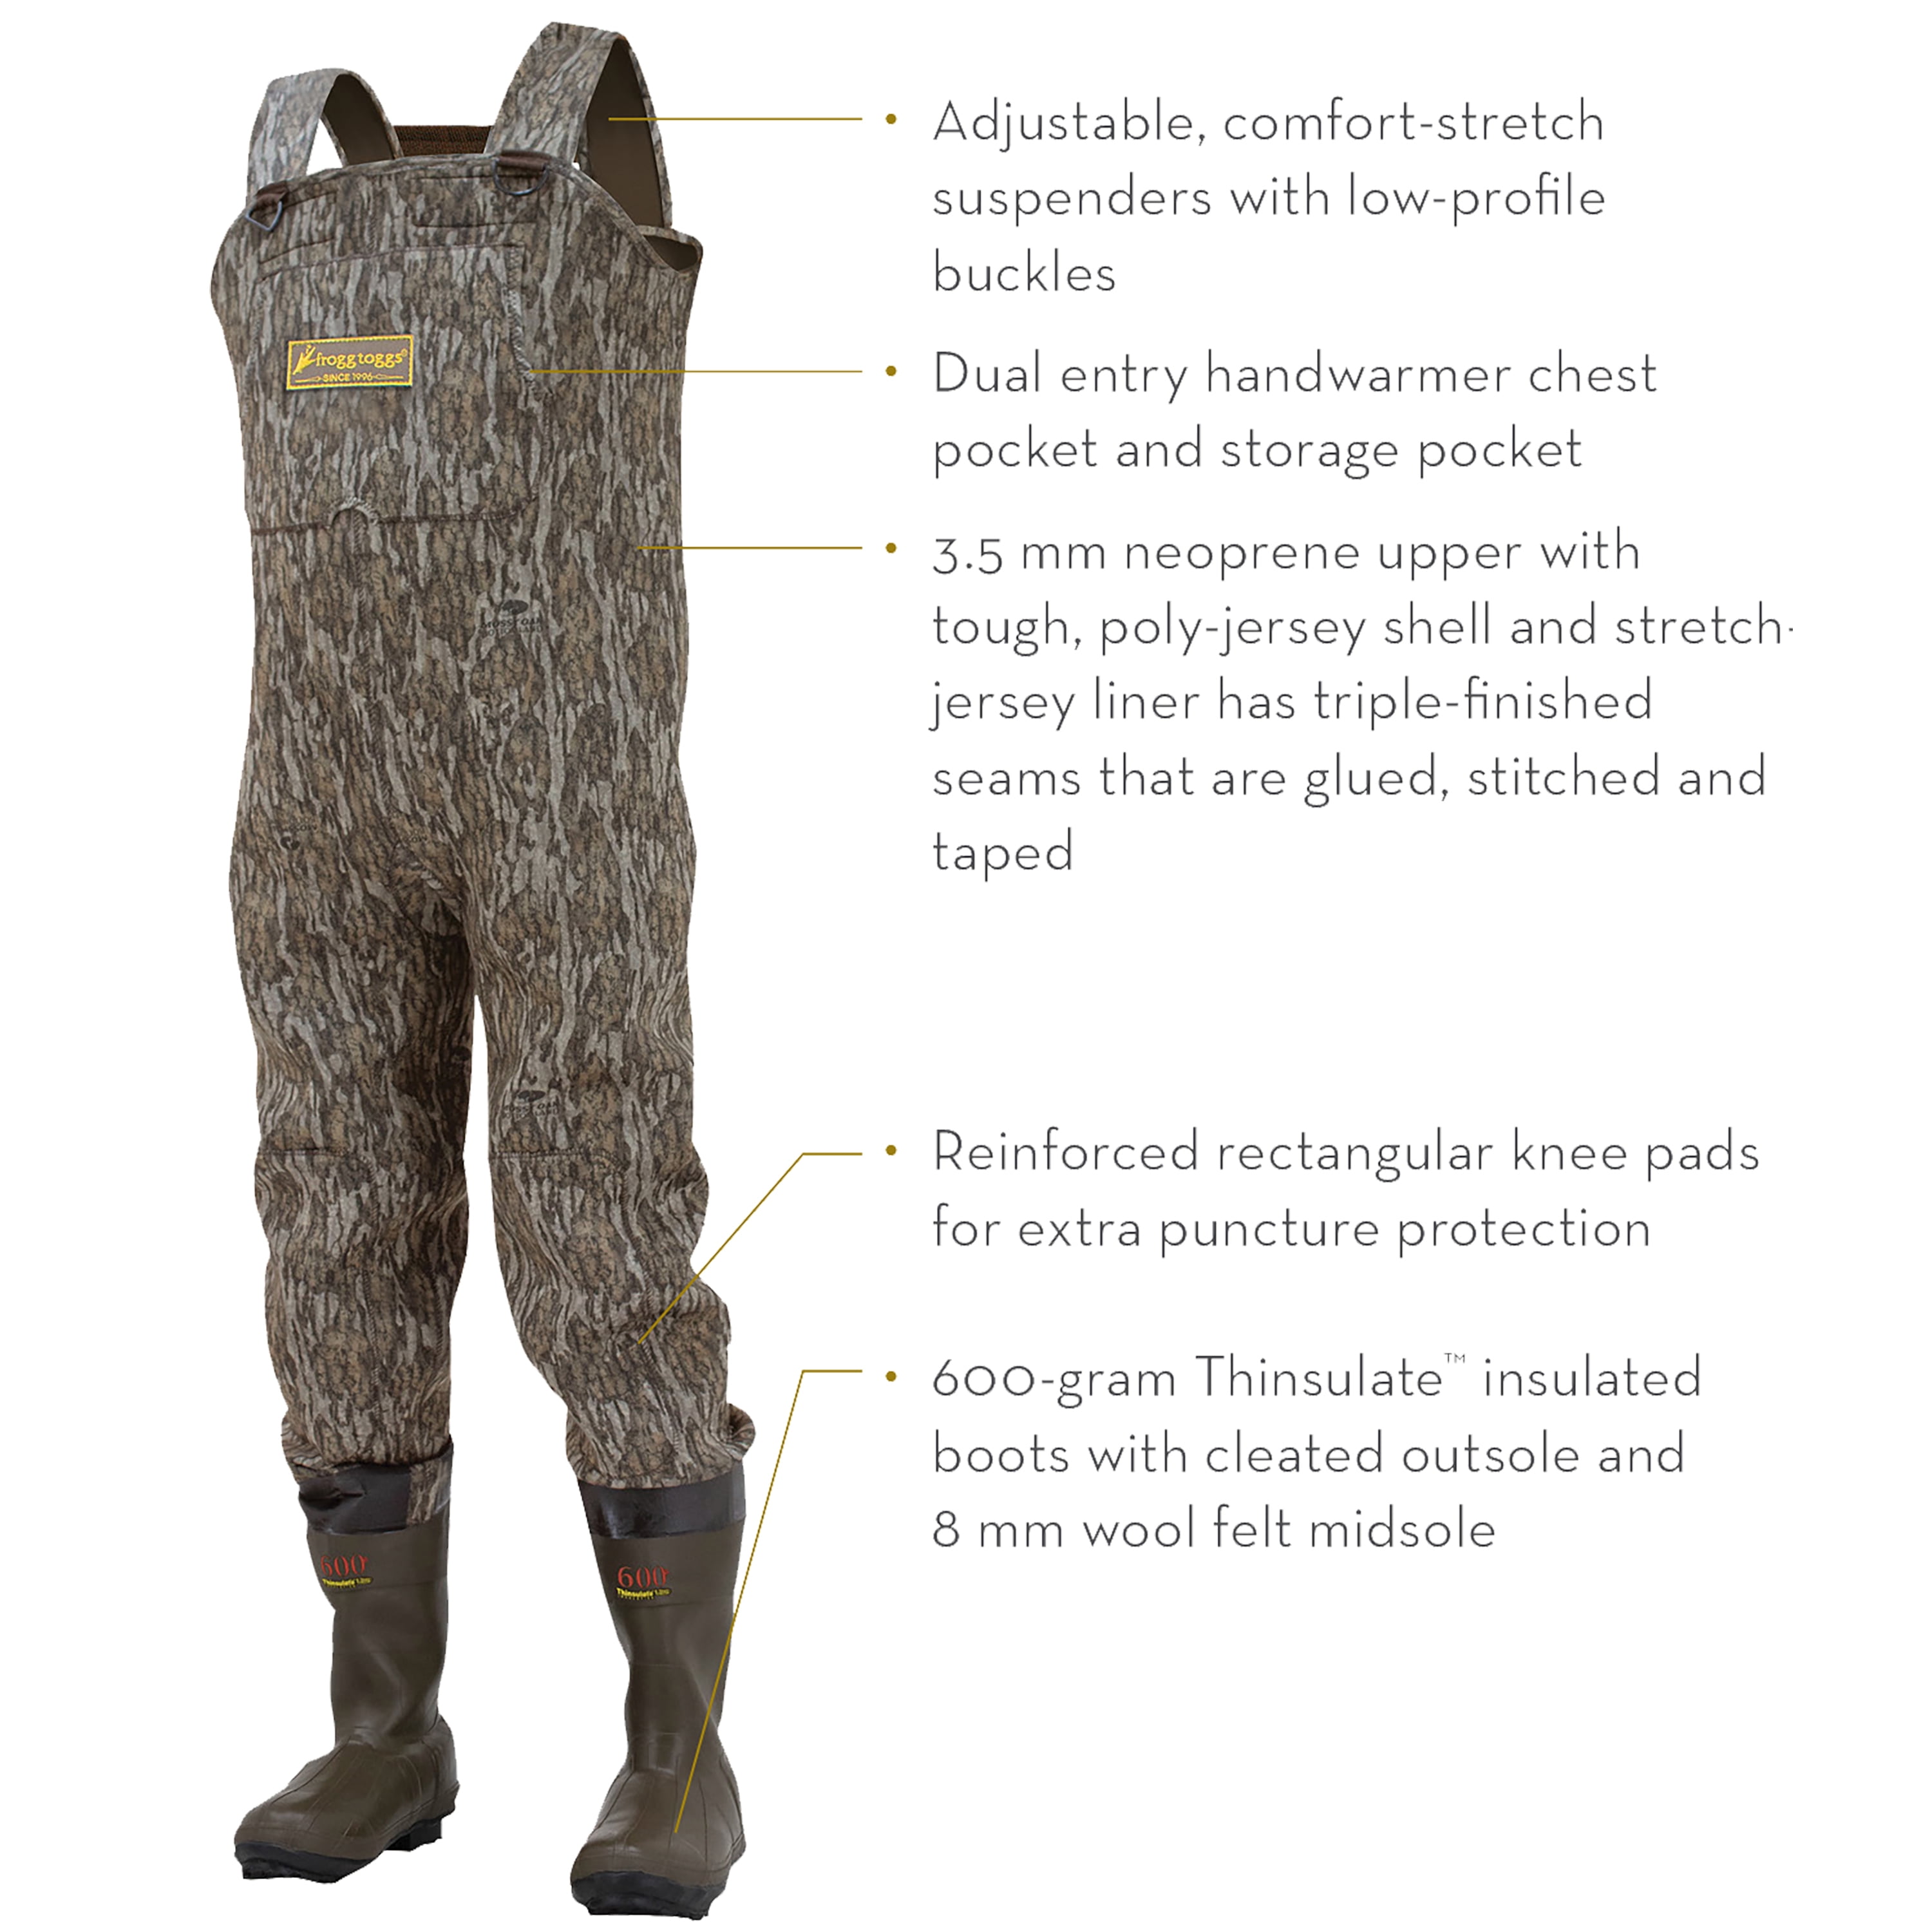 Frogg Toggs Amphib 3.5 Neoprene Realtree Max-5 Bootfoot Chest Waders 